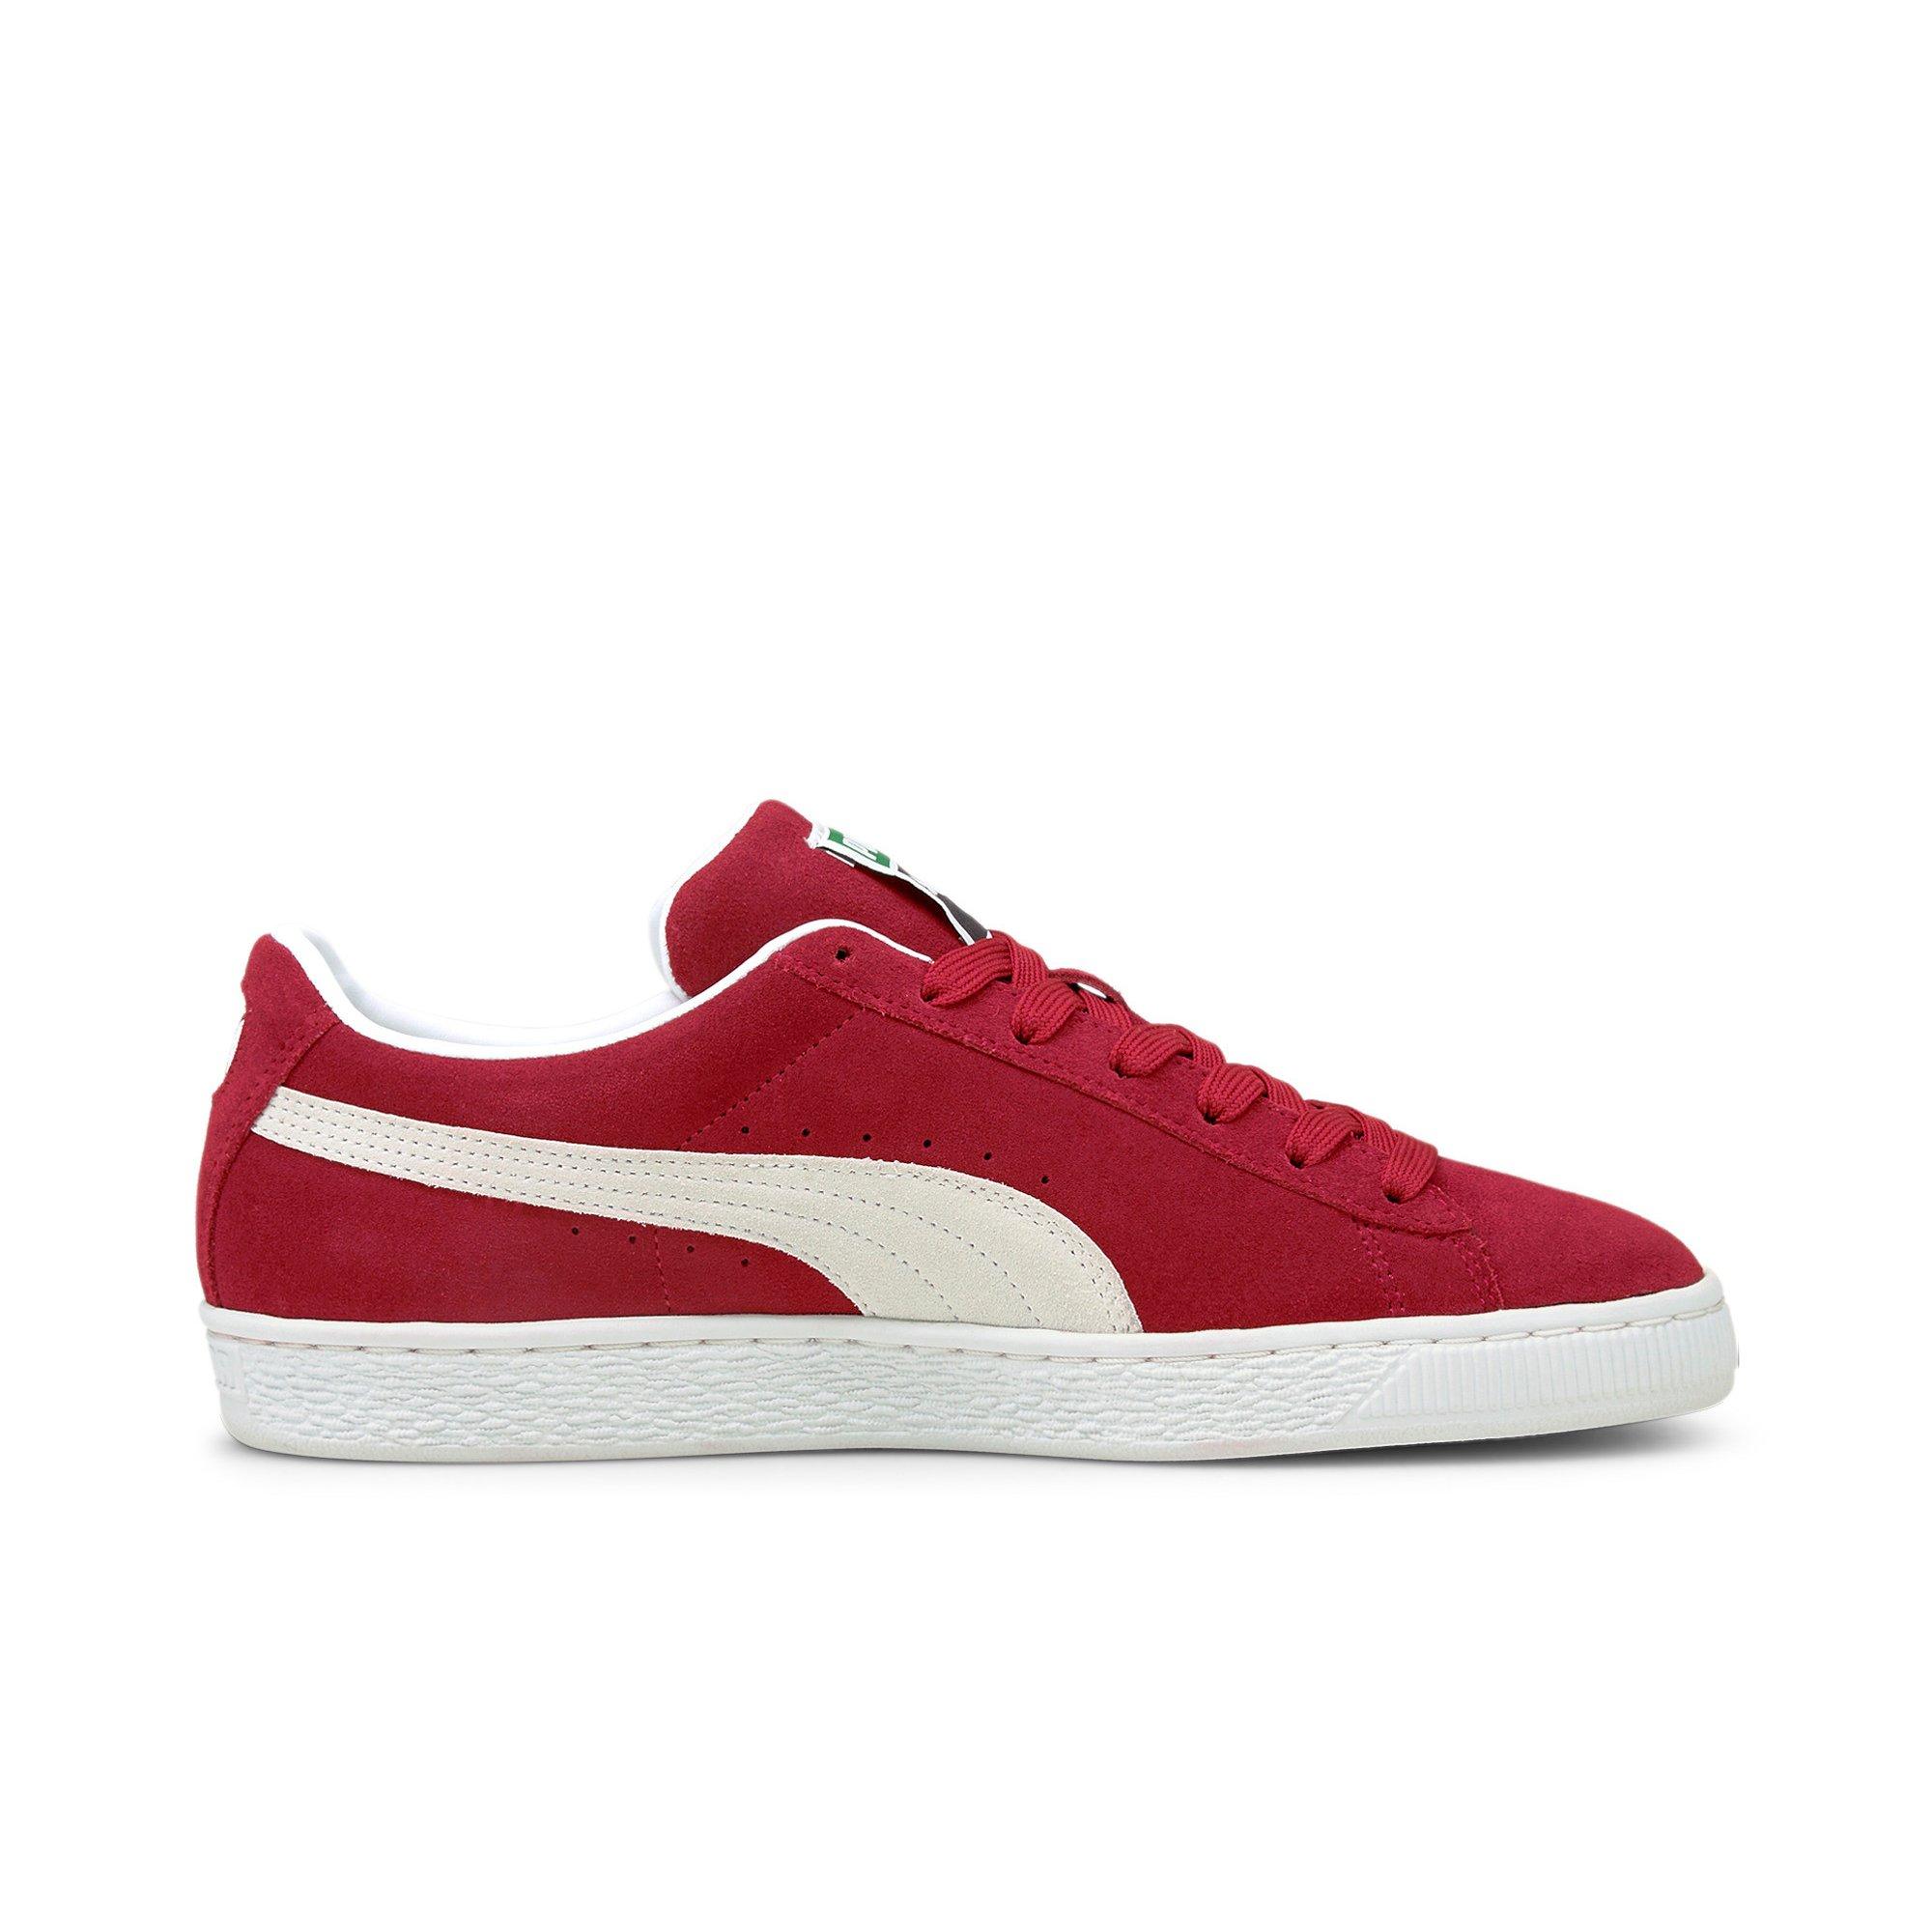 Suede Classic 21 Mens Lifestyle Shoe (Burgundy/White)